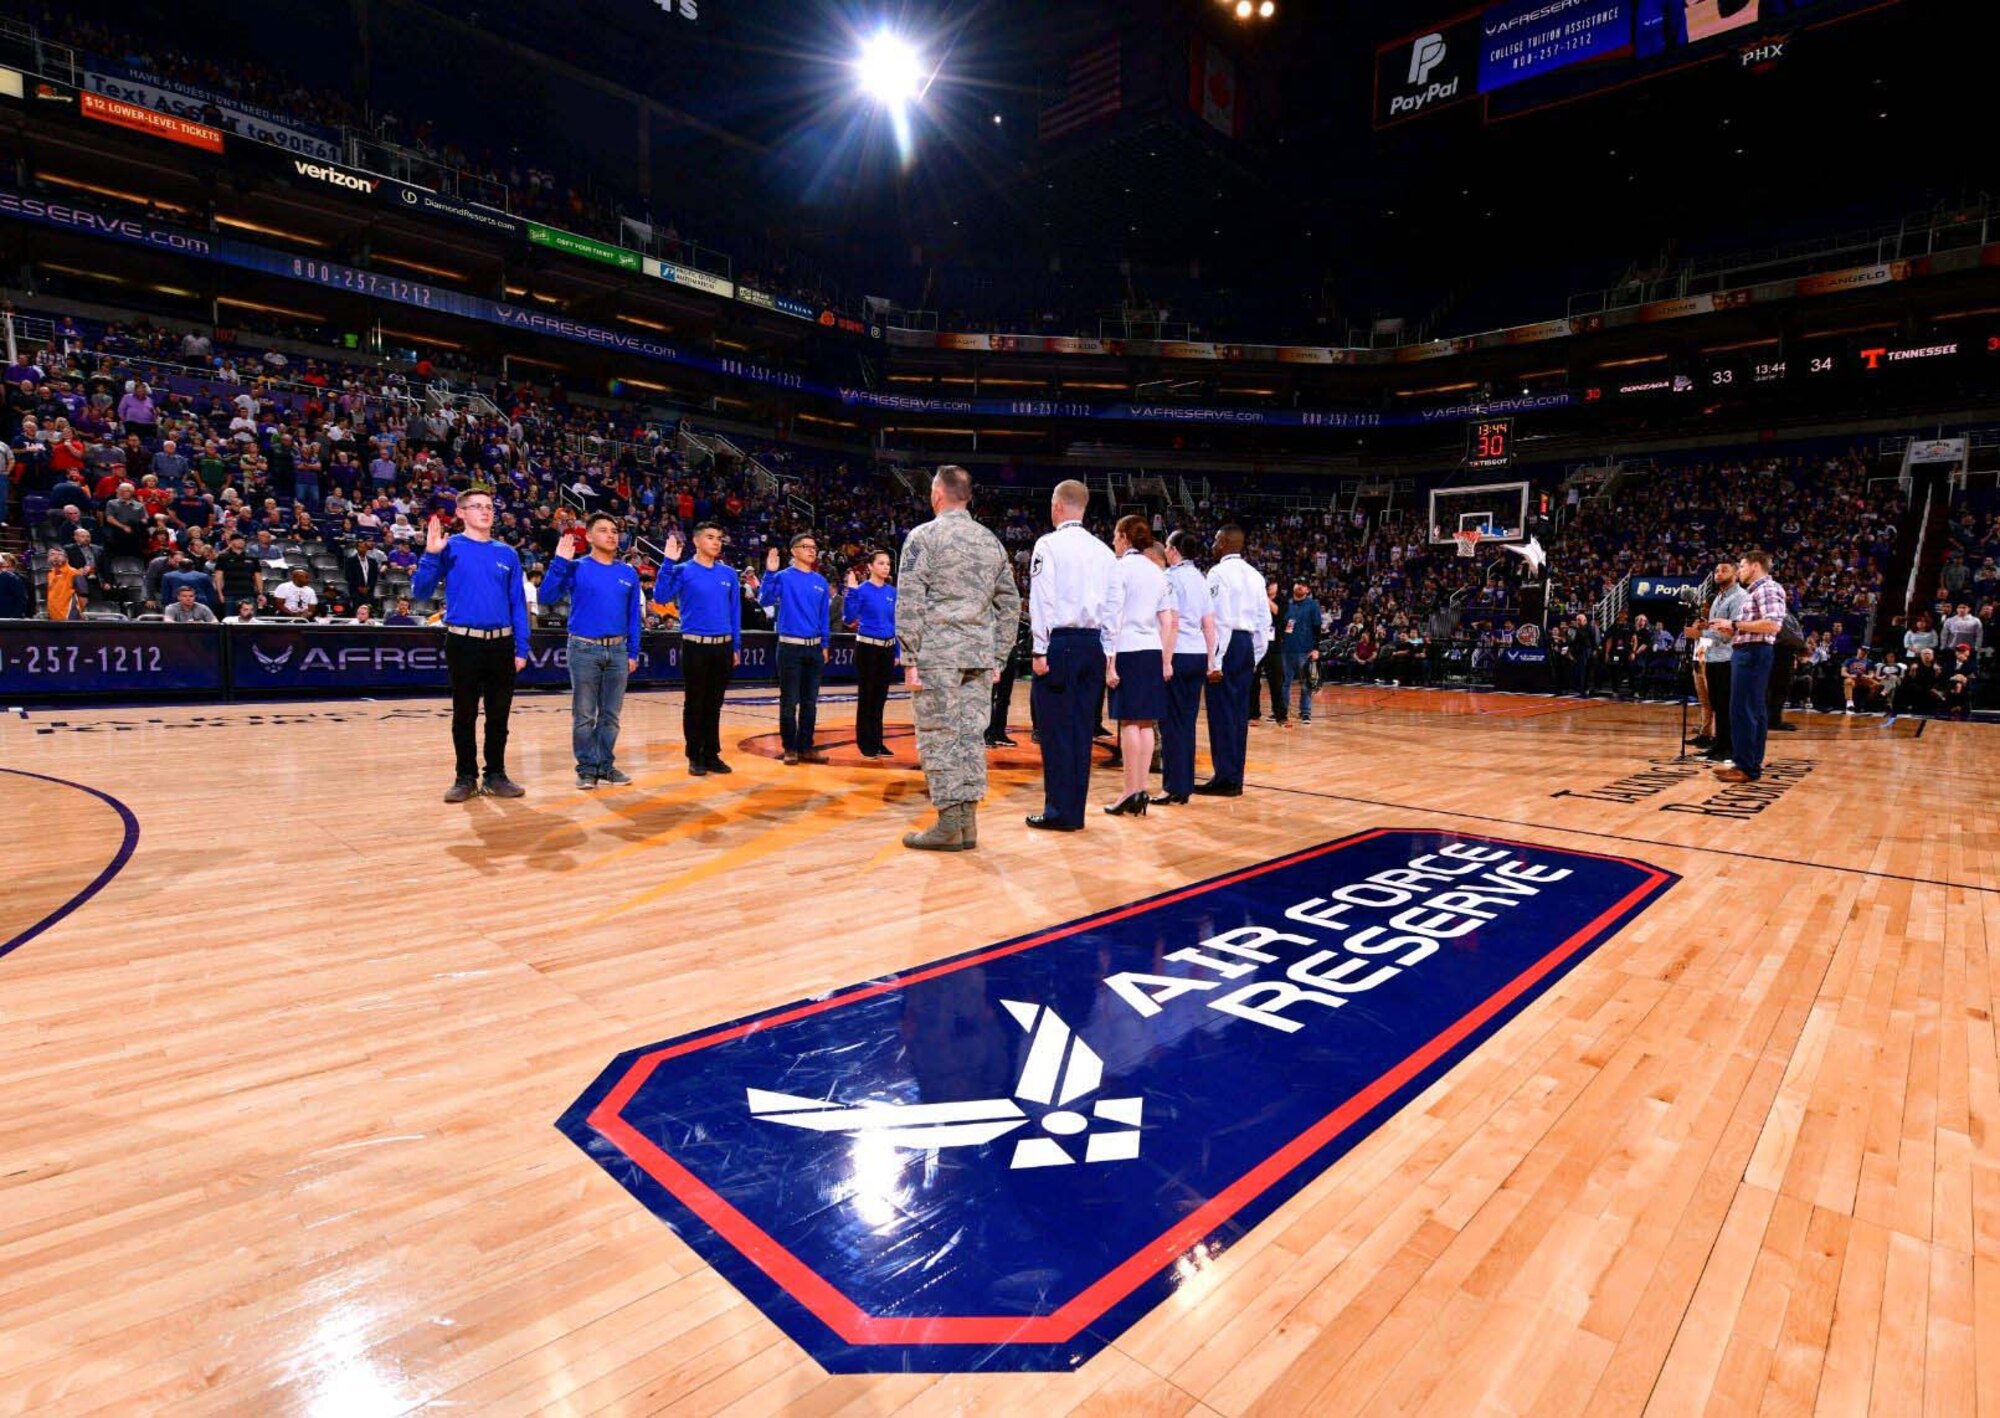 A mass enlistment was held by Team Luke at the Air Force Reserve Jerry Colangelo Classic basketball tournament in Phoenix. A group of 10 future Citizen Airman took part in the enlistment conducted by Col. Robert Tofil, the 944th Fighter Wing vice commander. (Courtesy photo)